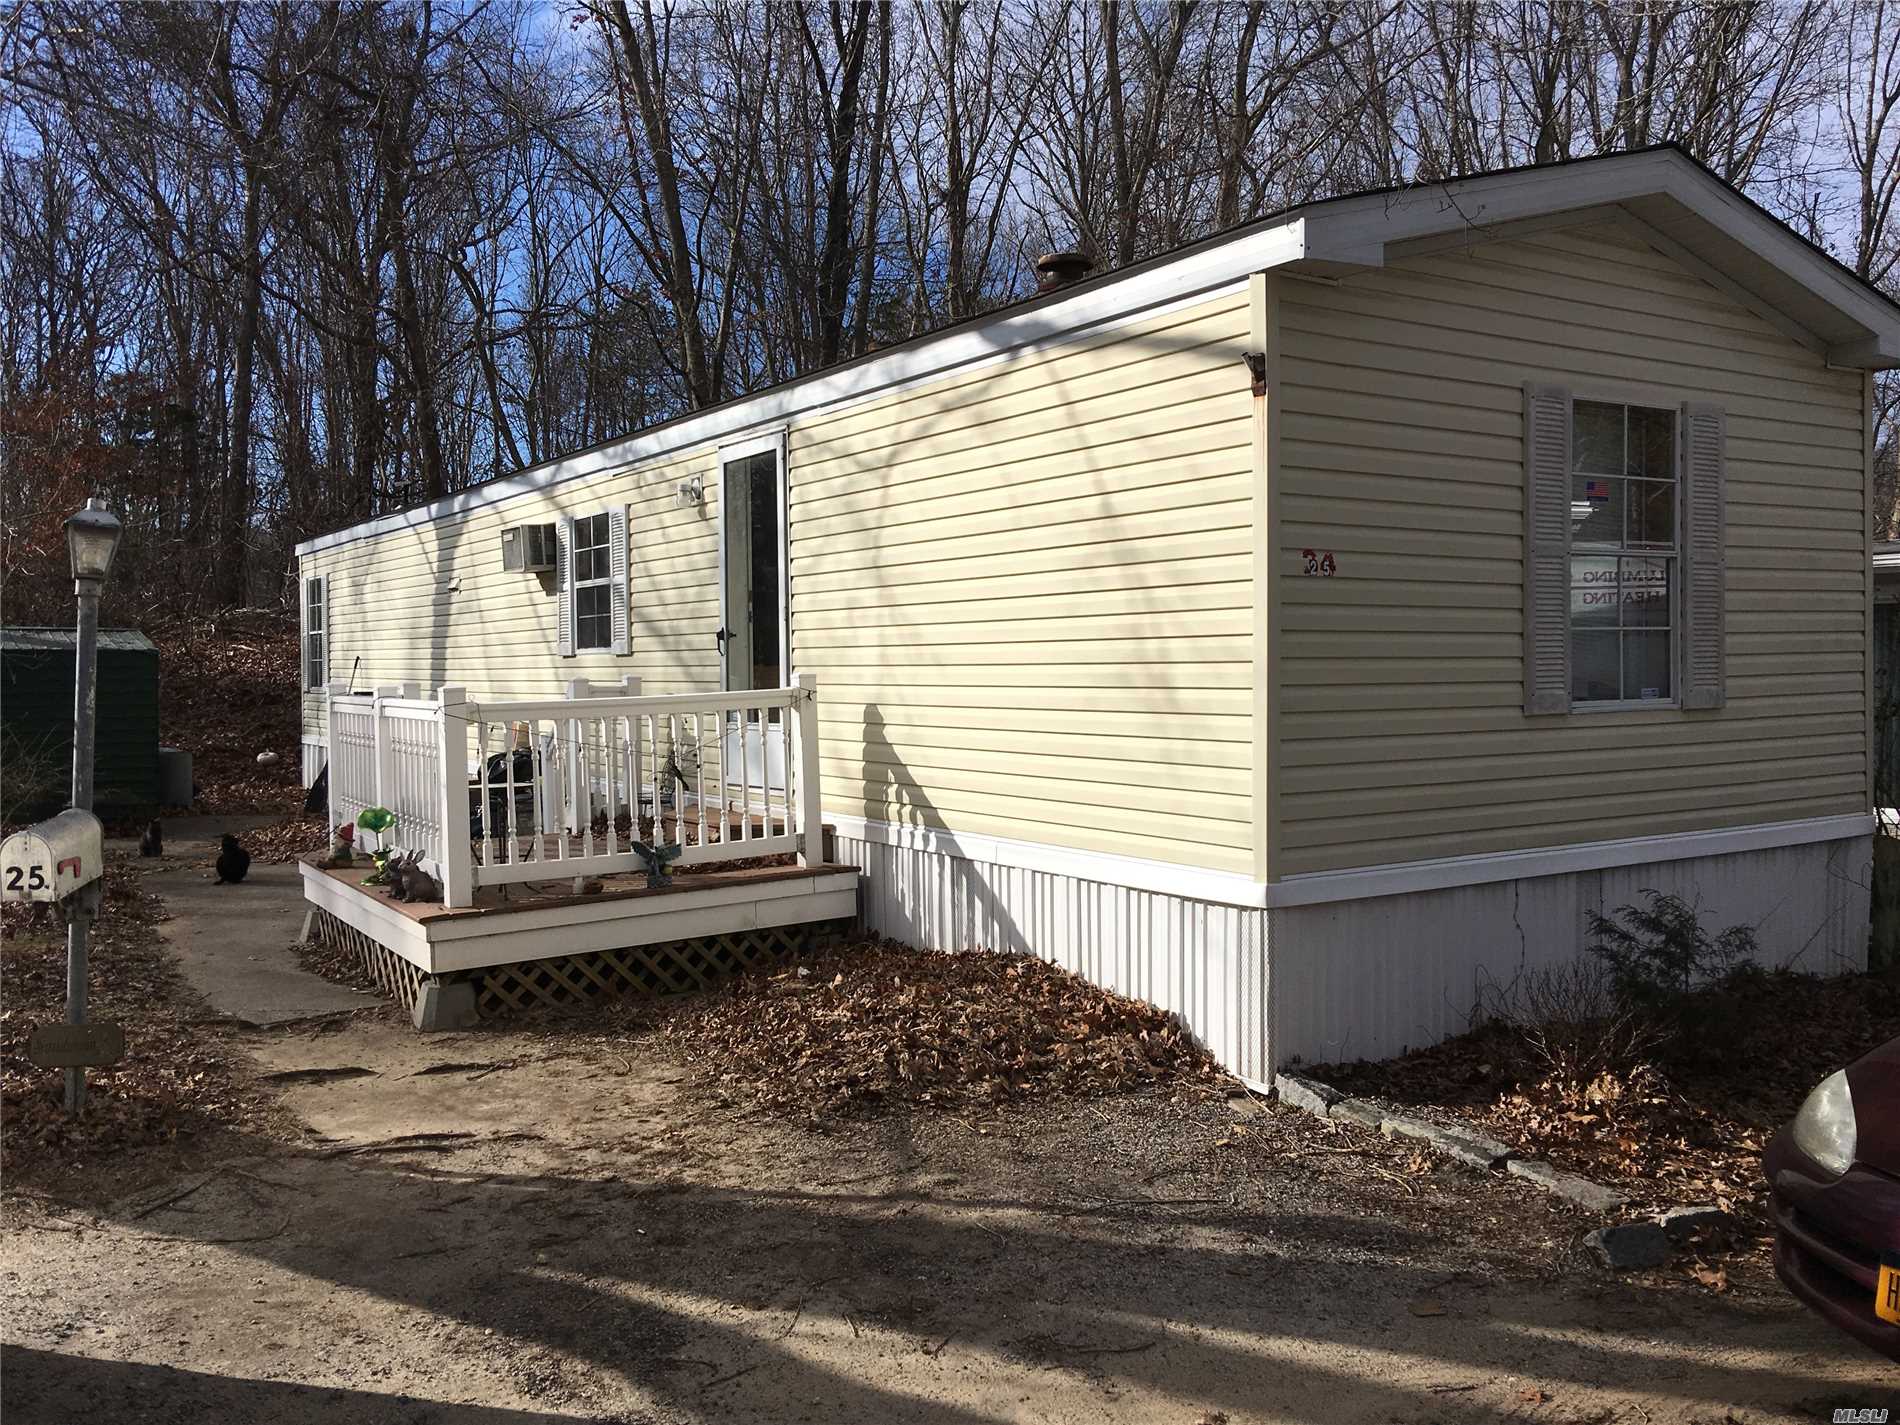 Large 2 Bedrm, 1 Bath, Eat In Kitchen, Living Rm, Shed, Deck, Patio. 5 Yr Old Roof. Located On A Cul De Sac Road. This Home Is Close To Shopping, Public Transportation, Beaches, Golf, And Near All The North Fork Has To Offer!